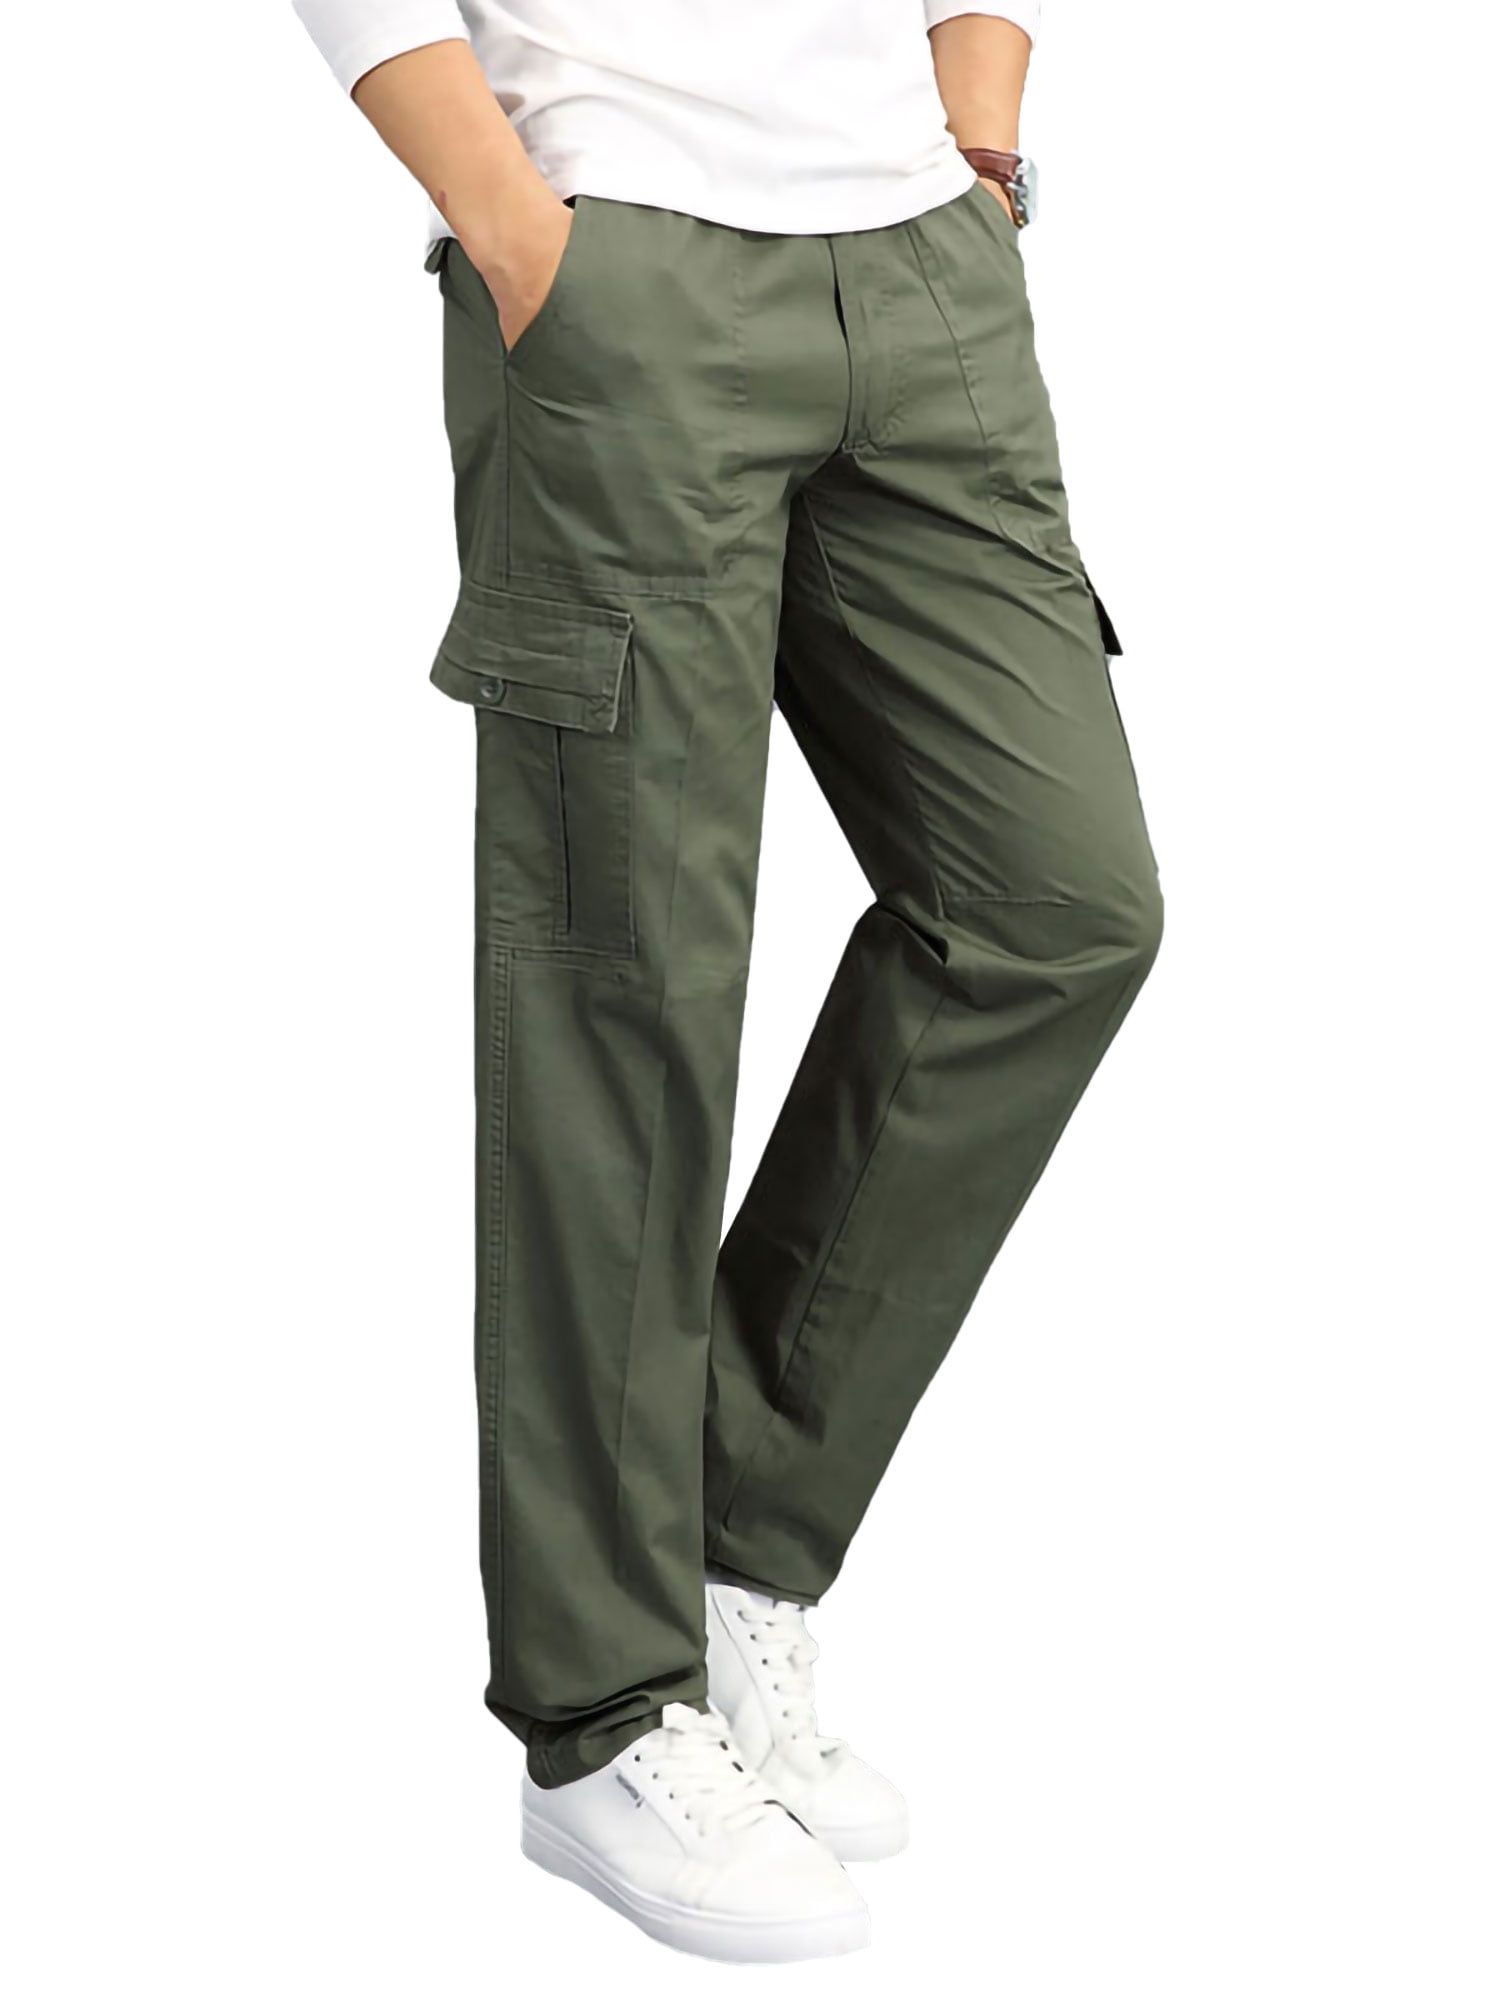 Military Combat Relaxed Fit Tactical Work Pants with Expandable Waist AKARMY Men's Lightweight Casual Cargo Pants 